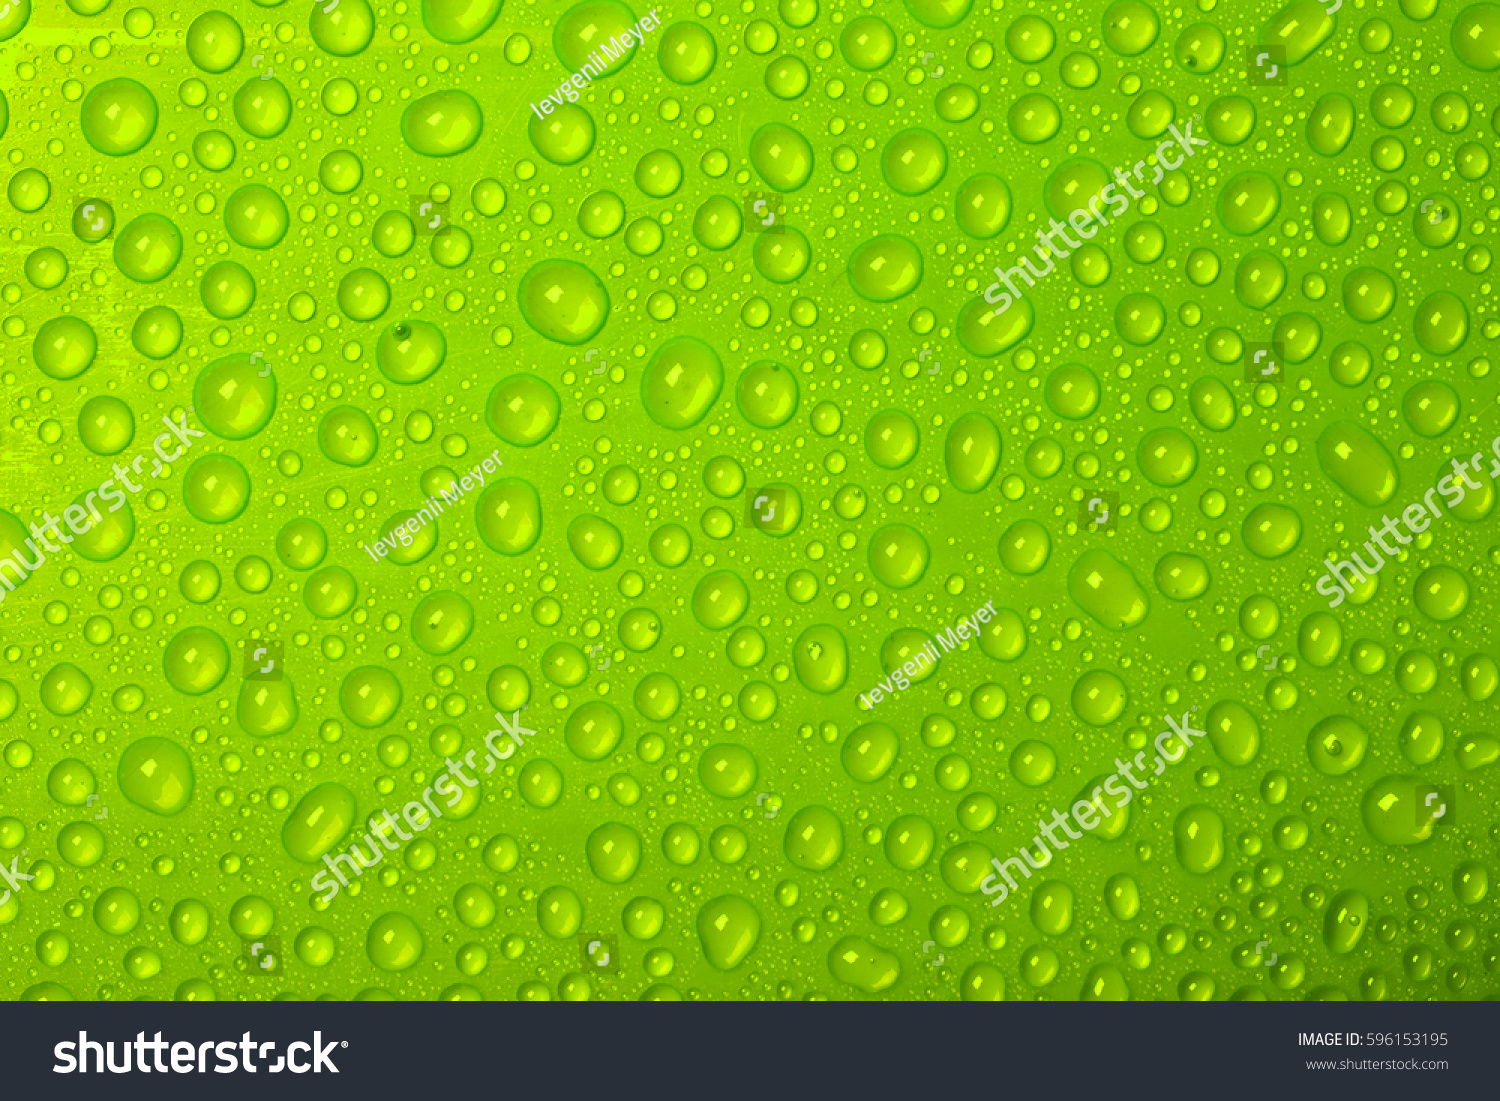 Water Drops On Green Background Stock Photo 596153195 - Shutterstock